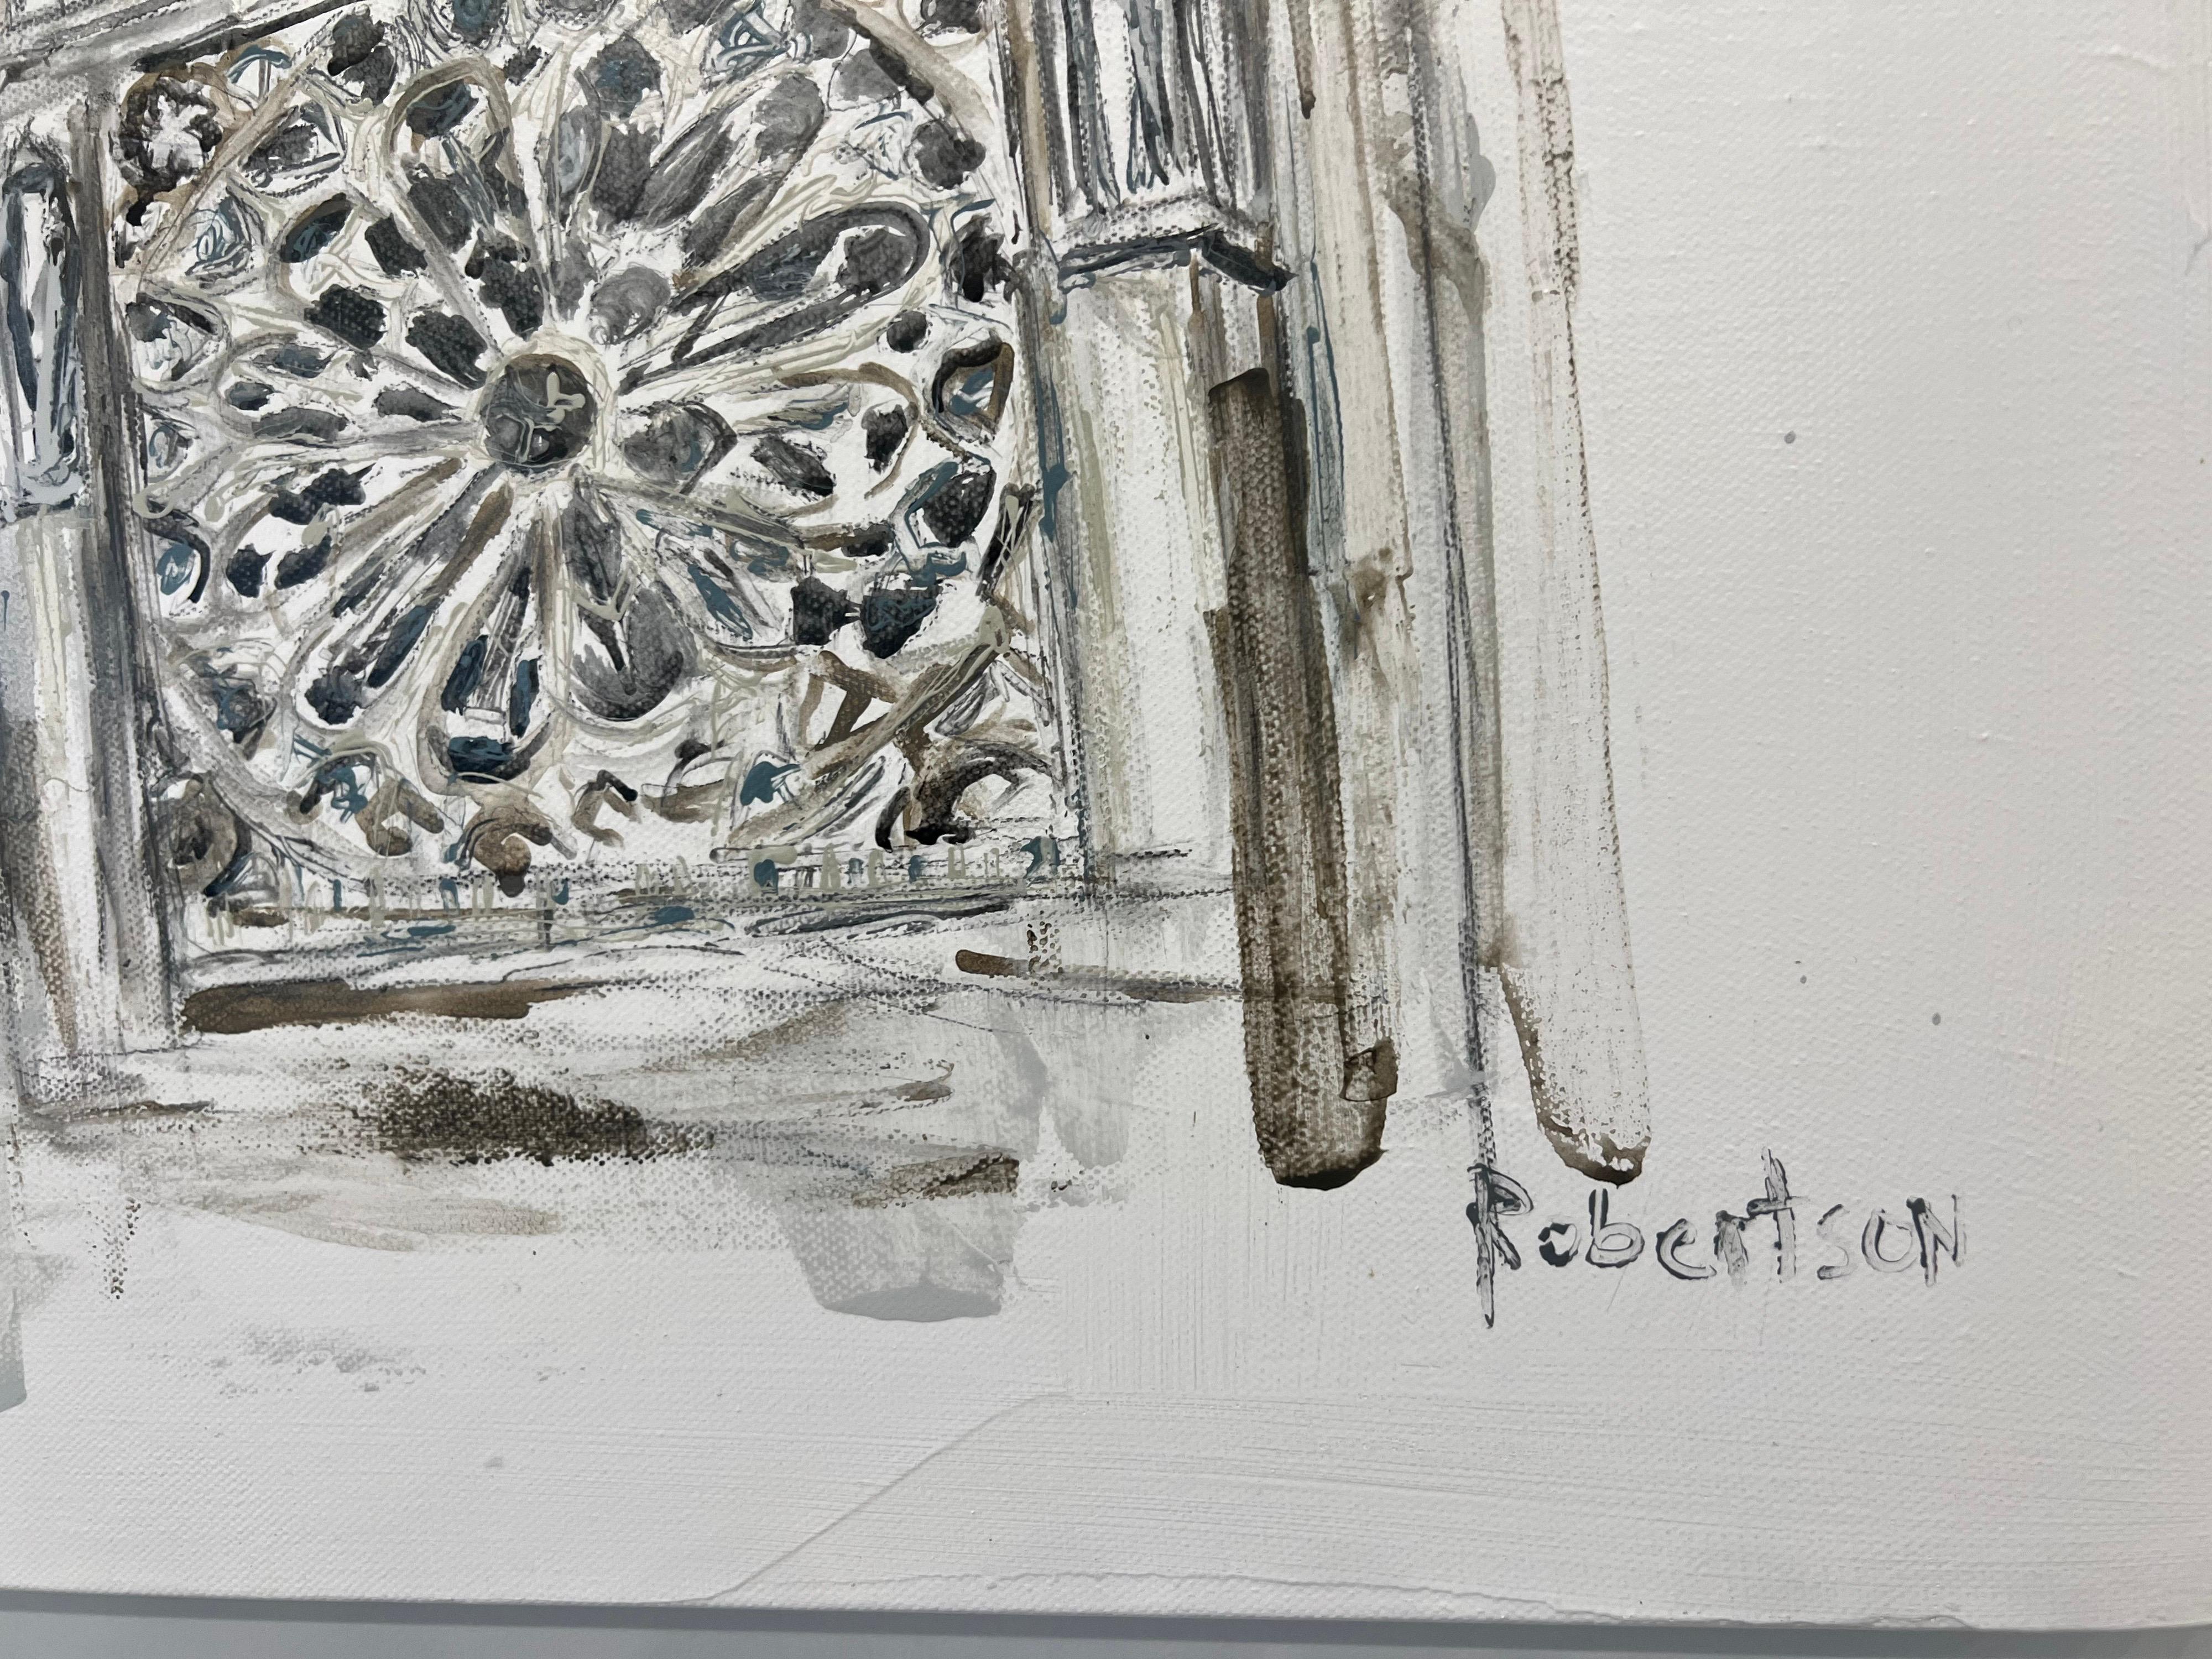 'Rose Window' is a petite Impressionist mixed media on canvas figurative painting created by American artist Sarah Robertson in 2021. Featuring an exquisite Notre Dame scene in Paris, the painting depicts a view of the rose window on Notre Dame. The